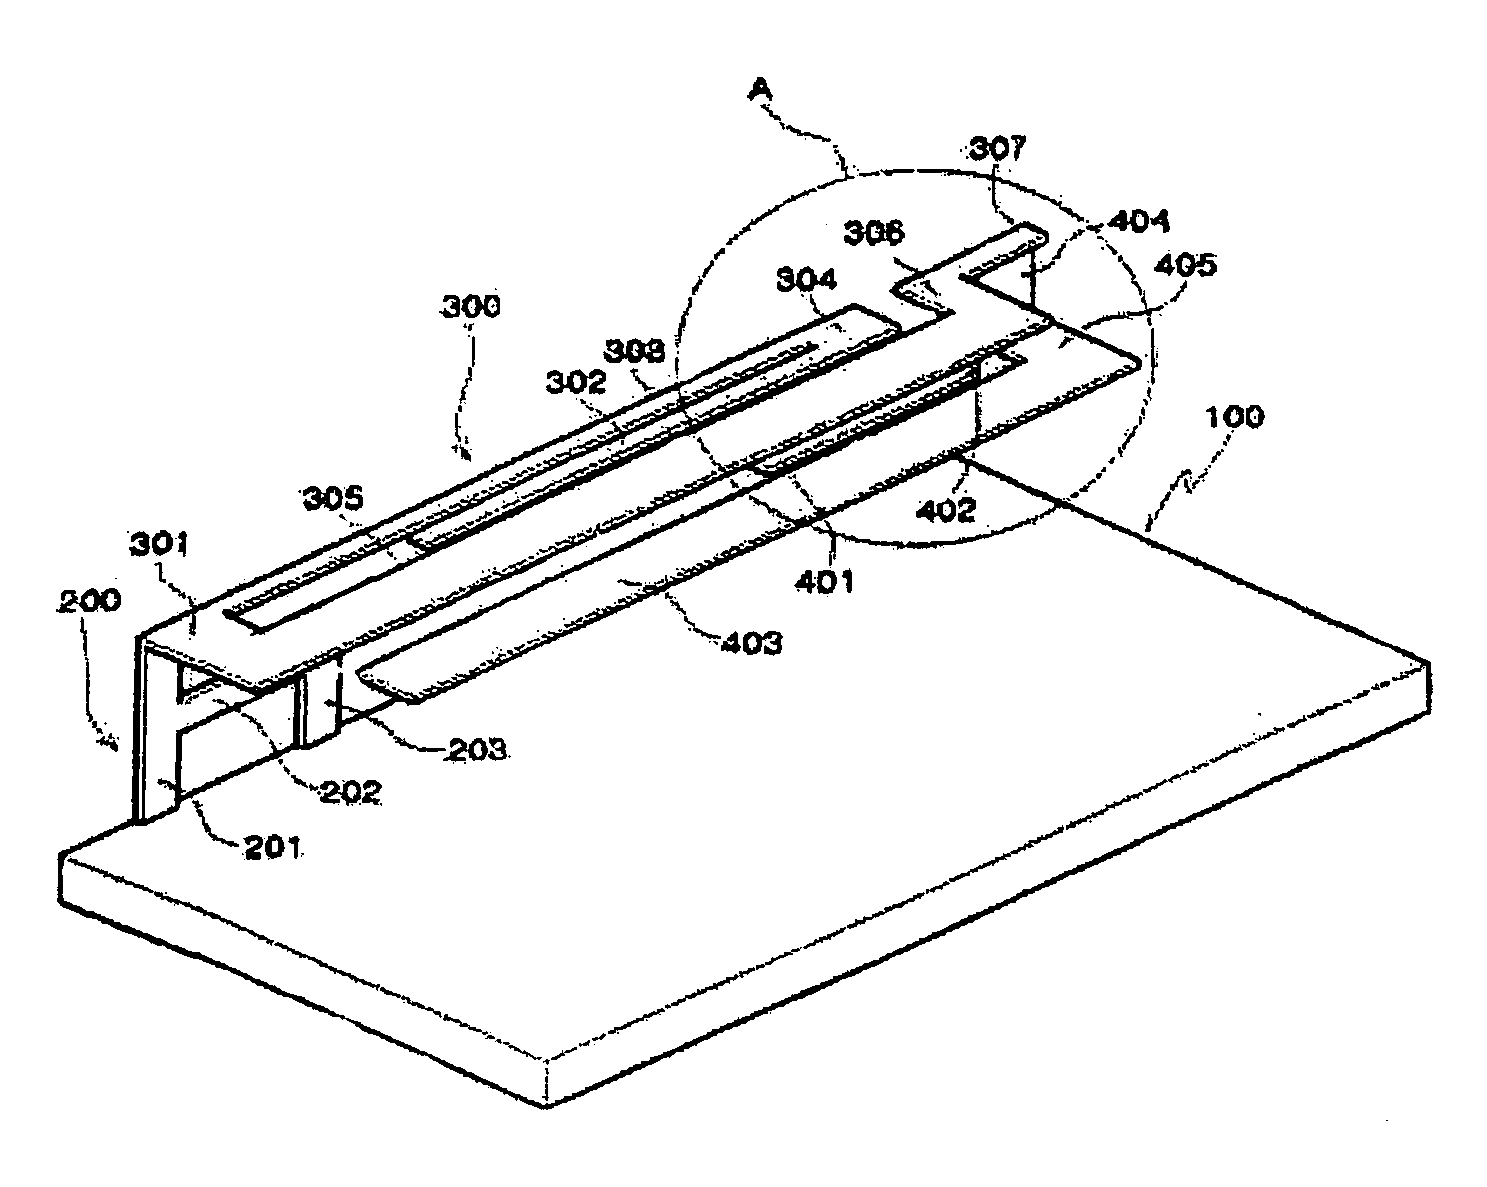 Internal multi-band antenna with multiple layers